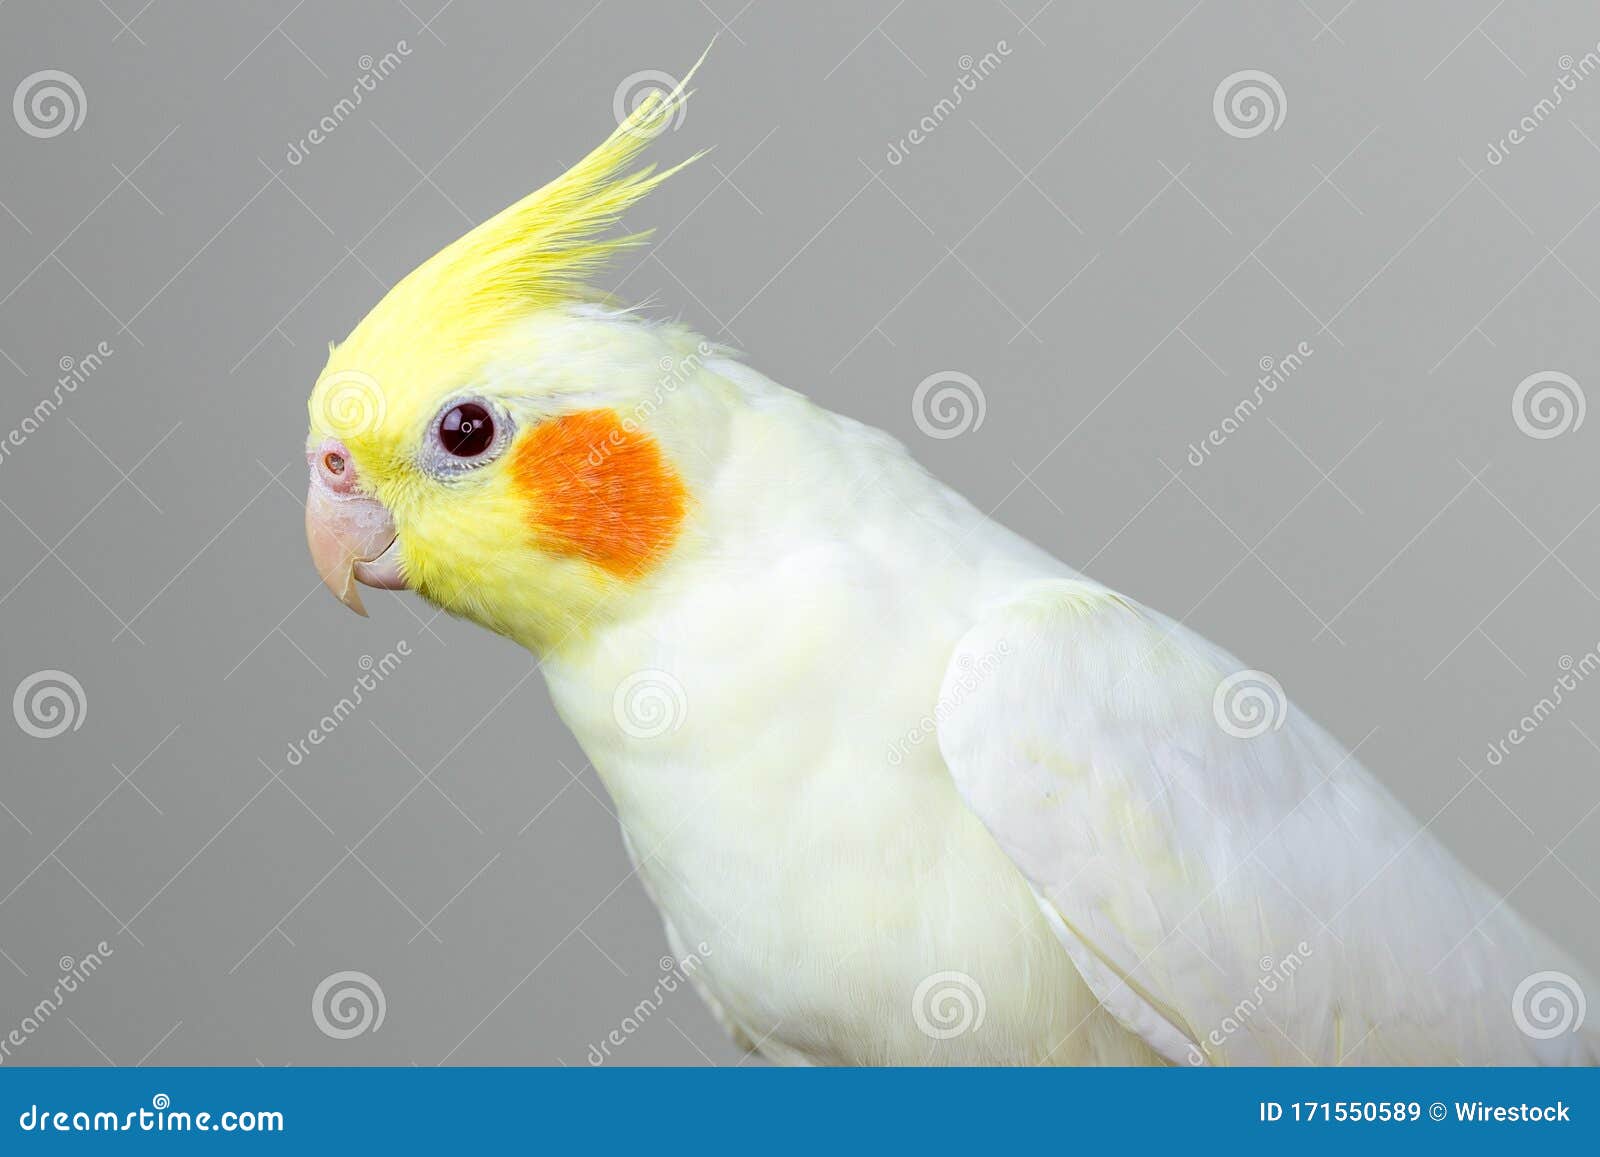 White Lutino Cockatiel Against A Grey Background Stock Image Image Of Bird Away 171550589,Italian Beans And Greens